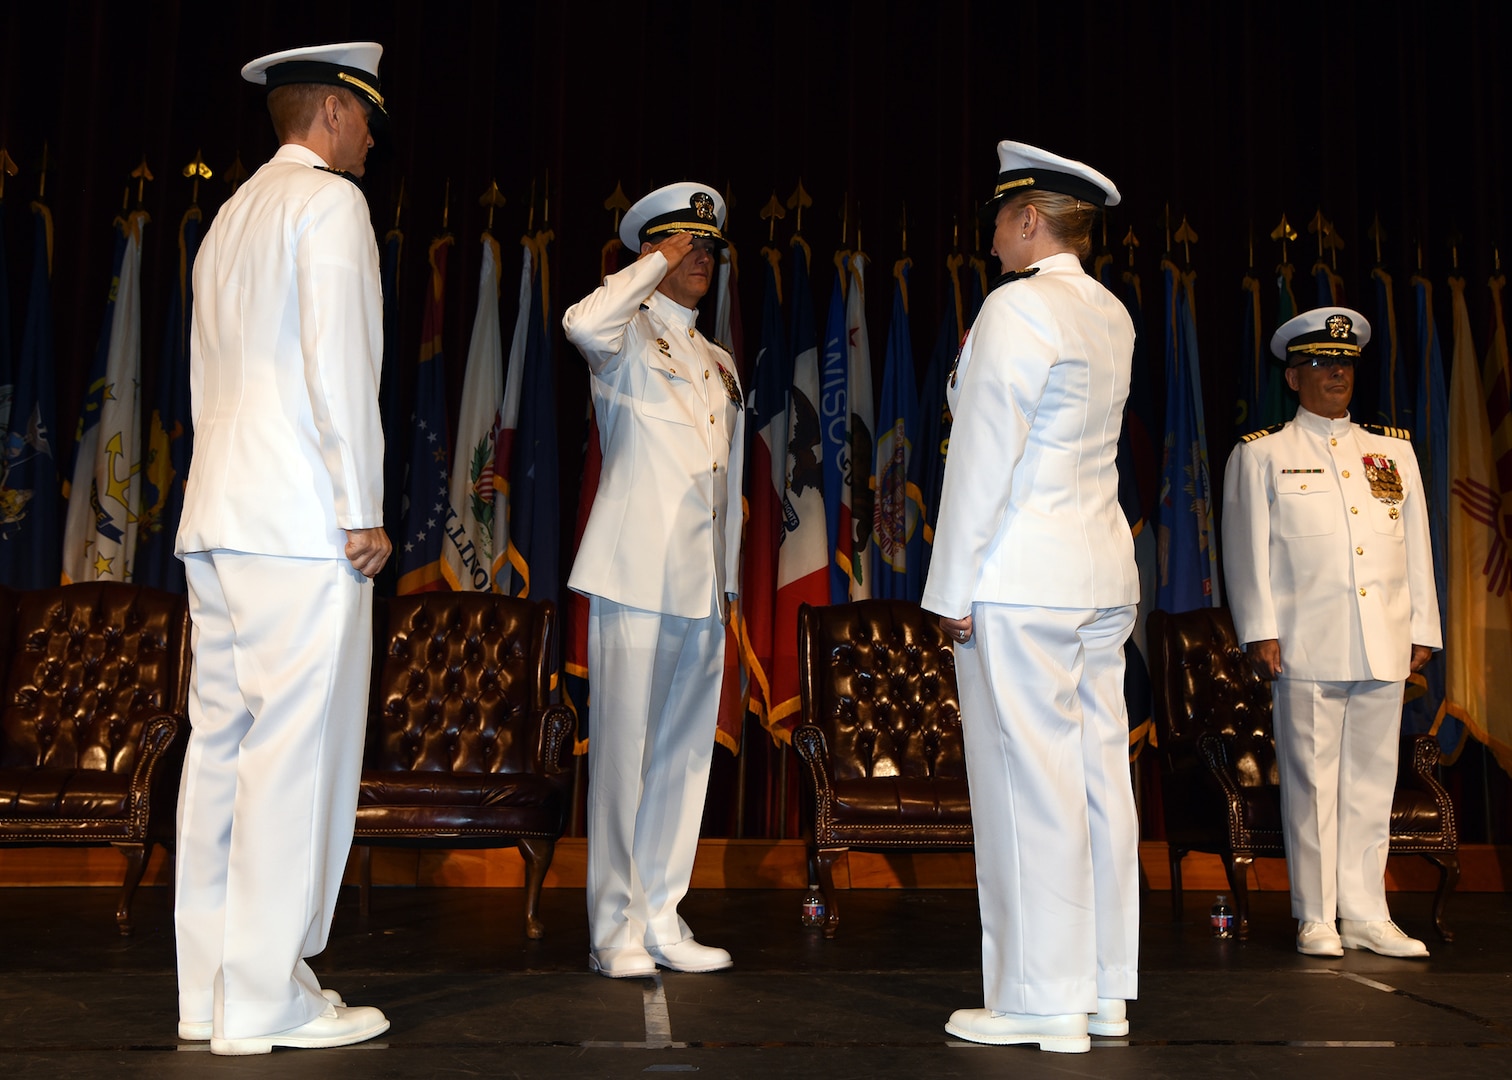 JOINT BASE SAN ANTONIO-FORT SAM HOUSTON – (Aug. 4, 2023) – Capt. Jennifer Buechel, Nurse Corps, of Woodhaven, Mich., assumed command of Naval Medical Research Unit (NAMRU) San Antonio from Capt. Gerald DeLong, Medical Service Corps (MSC), of Belvidere, Ill., during a Change of Command Ceremony held at the Fort Sam Houston Theatre.  Presiding over the ceremony was Capt. William Deniston, MSC, commander, Naval Medical Research Command (NMRC). NAMRU San Antonio’s mission is to conduct gap driven combat casualty care, craniofacial, and directed energy research to improve survival, operational readiness, and safety of Department of Defense (DoD) personnel engaged in routine and expeditionary operations. It is one of the leading research and development laboratories for the U.S. Navy under the DoD and is one of eight subordinate research commands in the global network of laboratories operating under NMRC in Silver Spring, Md. (U.S. Navy photo by Burrell Parmer, NAMRU San Antonio Public Affairs/Released)